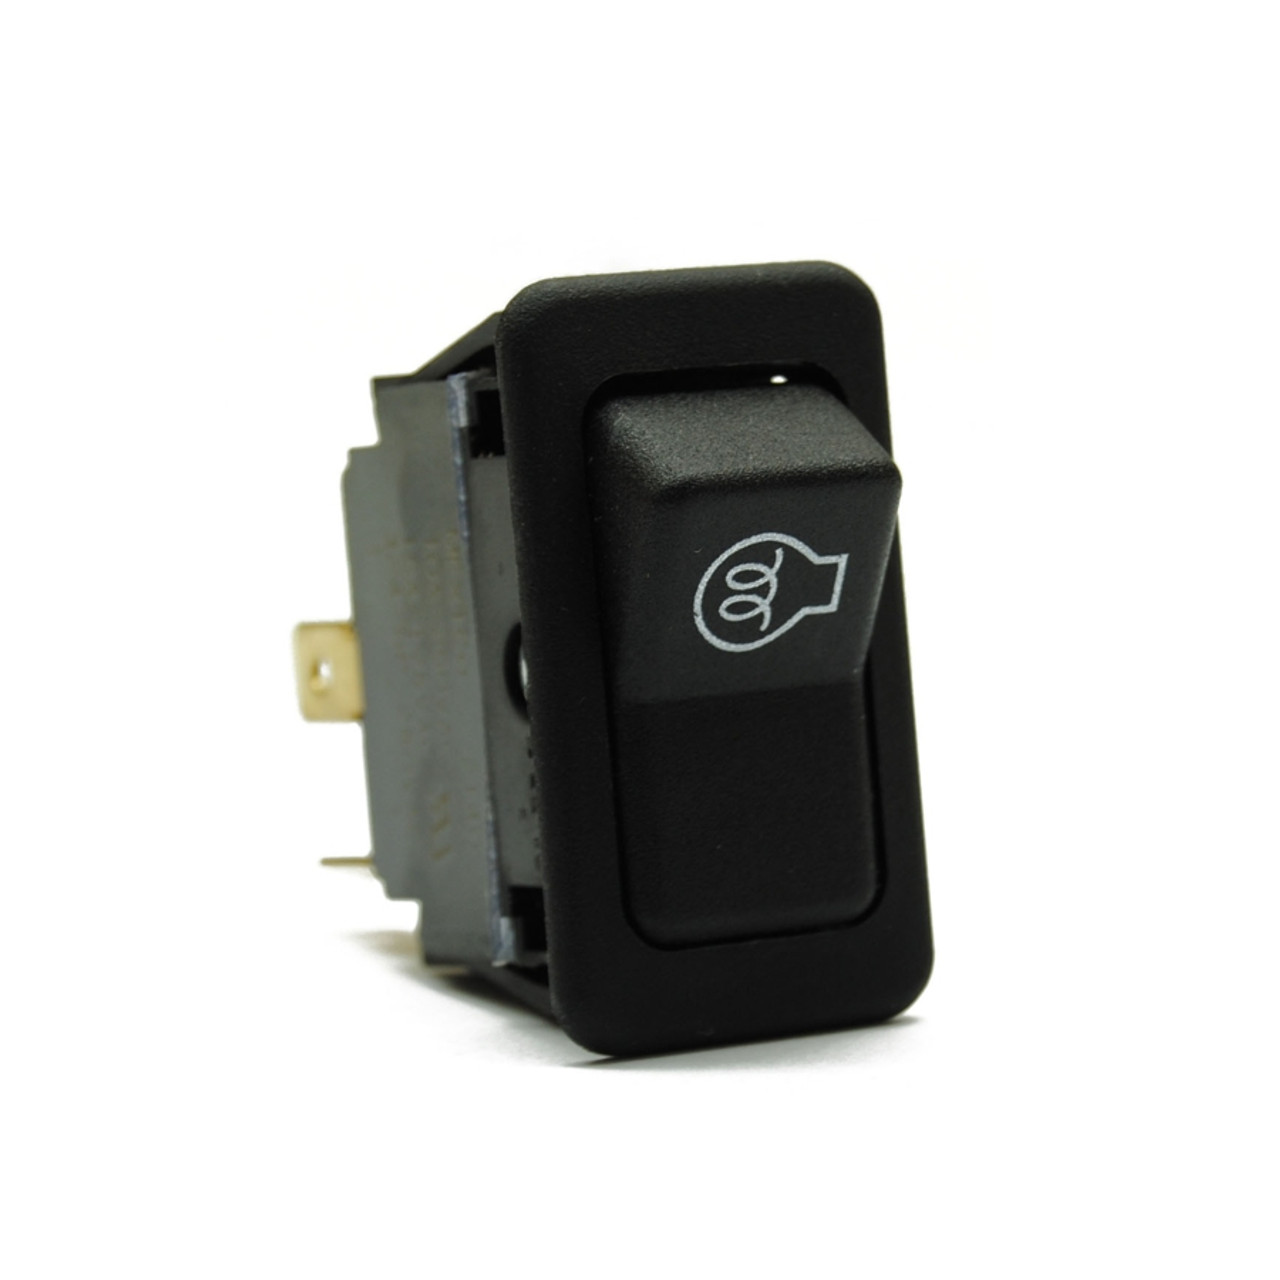 Glow Plug Switch for Bobcat® Skid Steers | Replaces OEM # 6668927